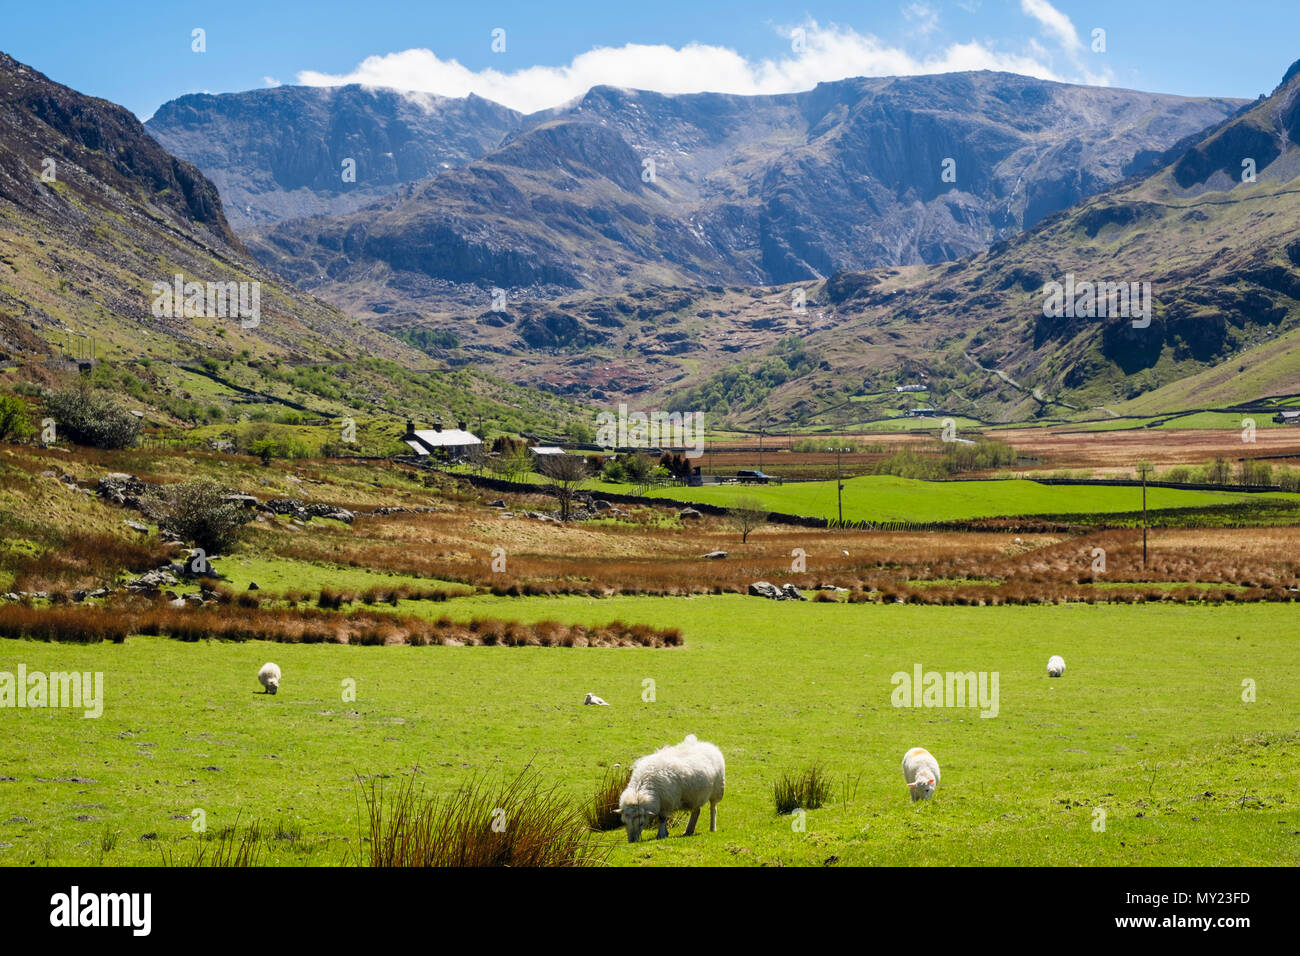 Looking up Nant Ffrancon valley to Glyderau mountains with sheep grazing in country fields in Snowdonia National Park. Ogwen BethesdaNorth Wales UK Stock Photo